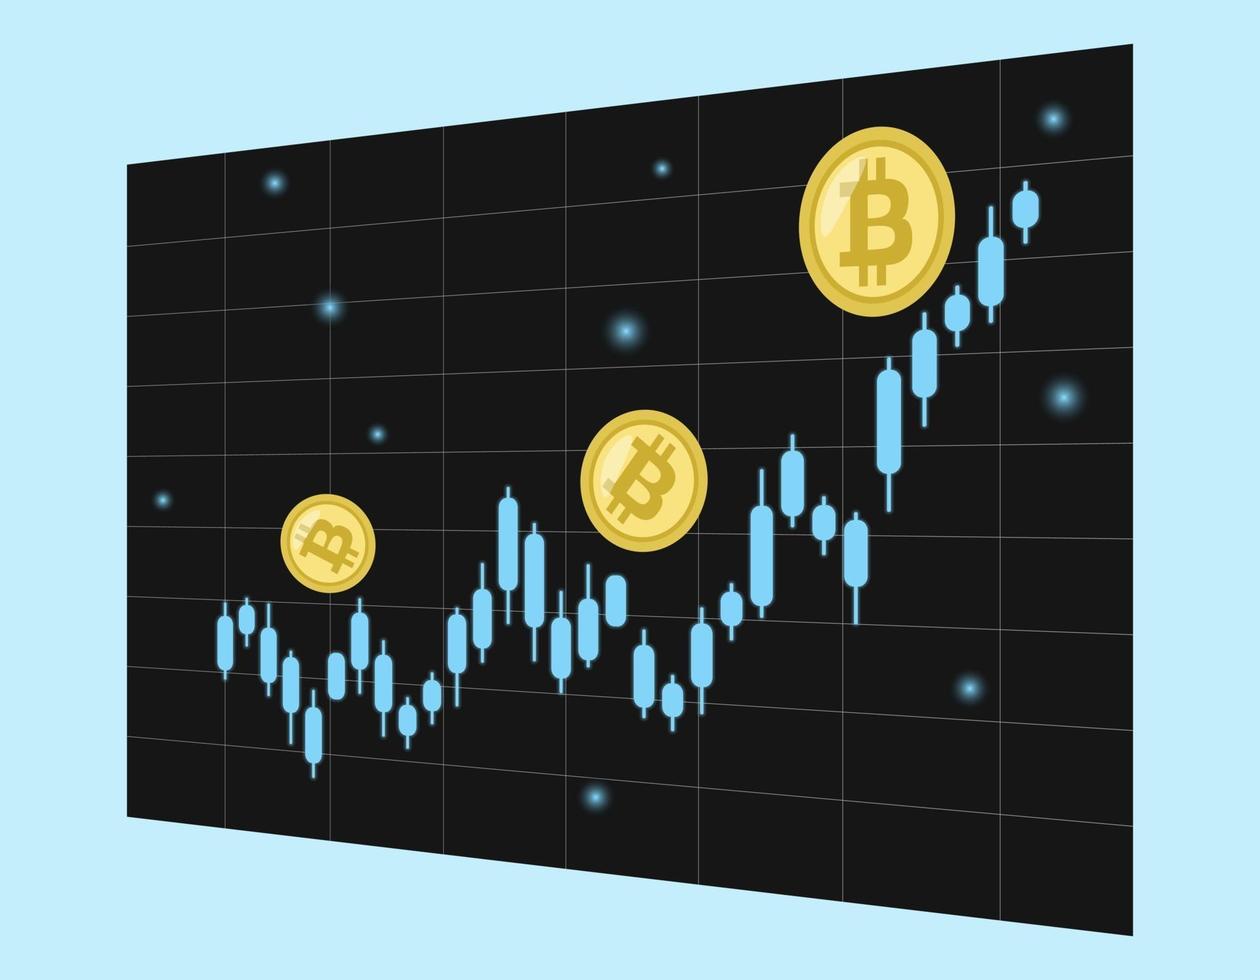 Bitcoin increases. Crypto currency chart goes up vector